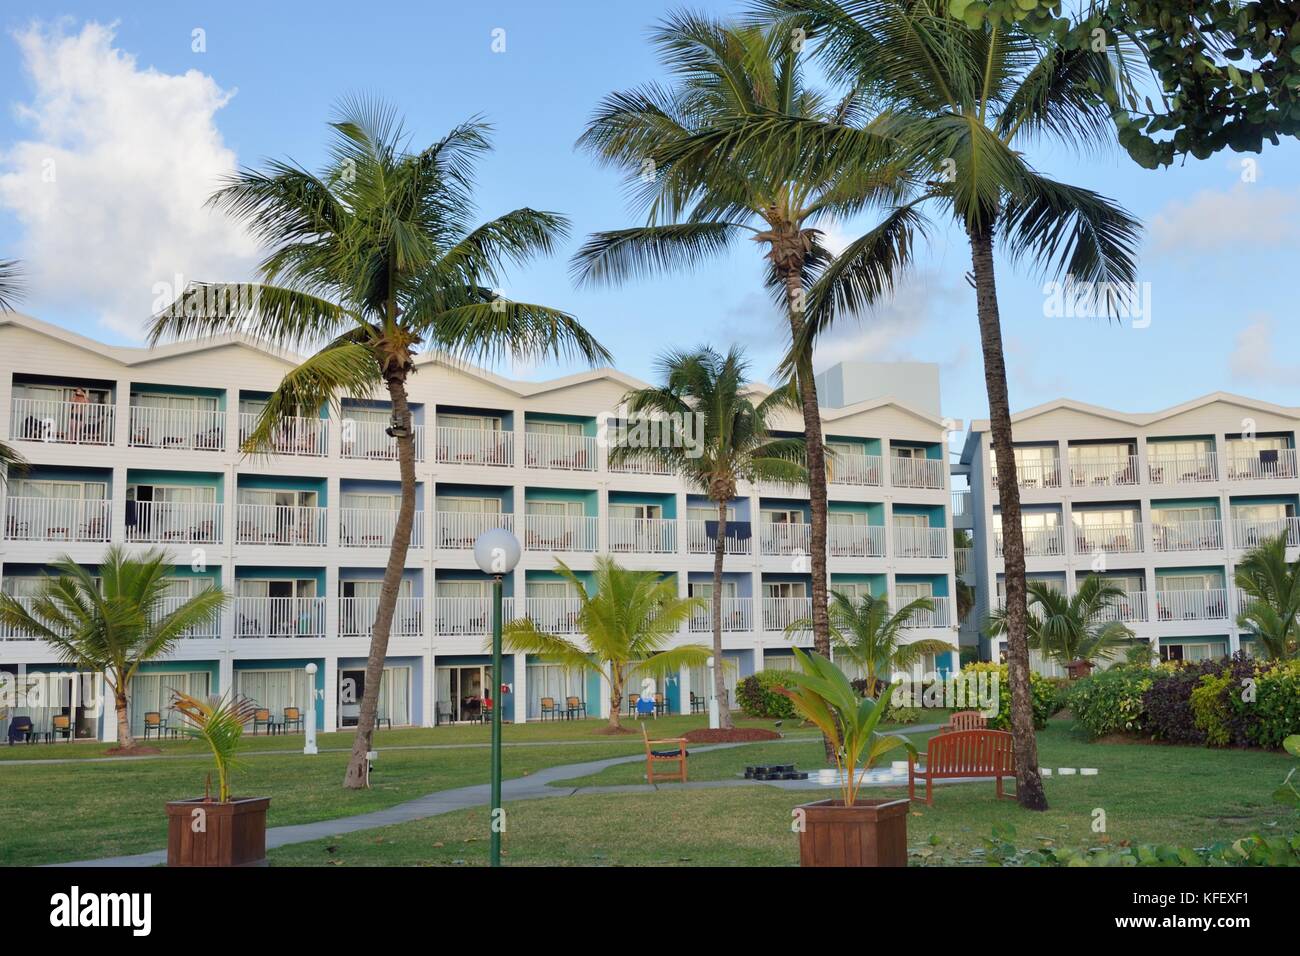 Caribbean large hotel with trees Stock Photo